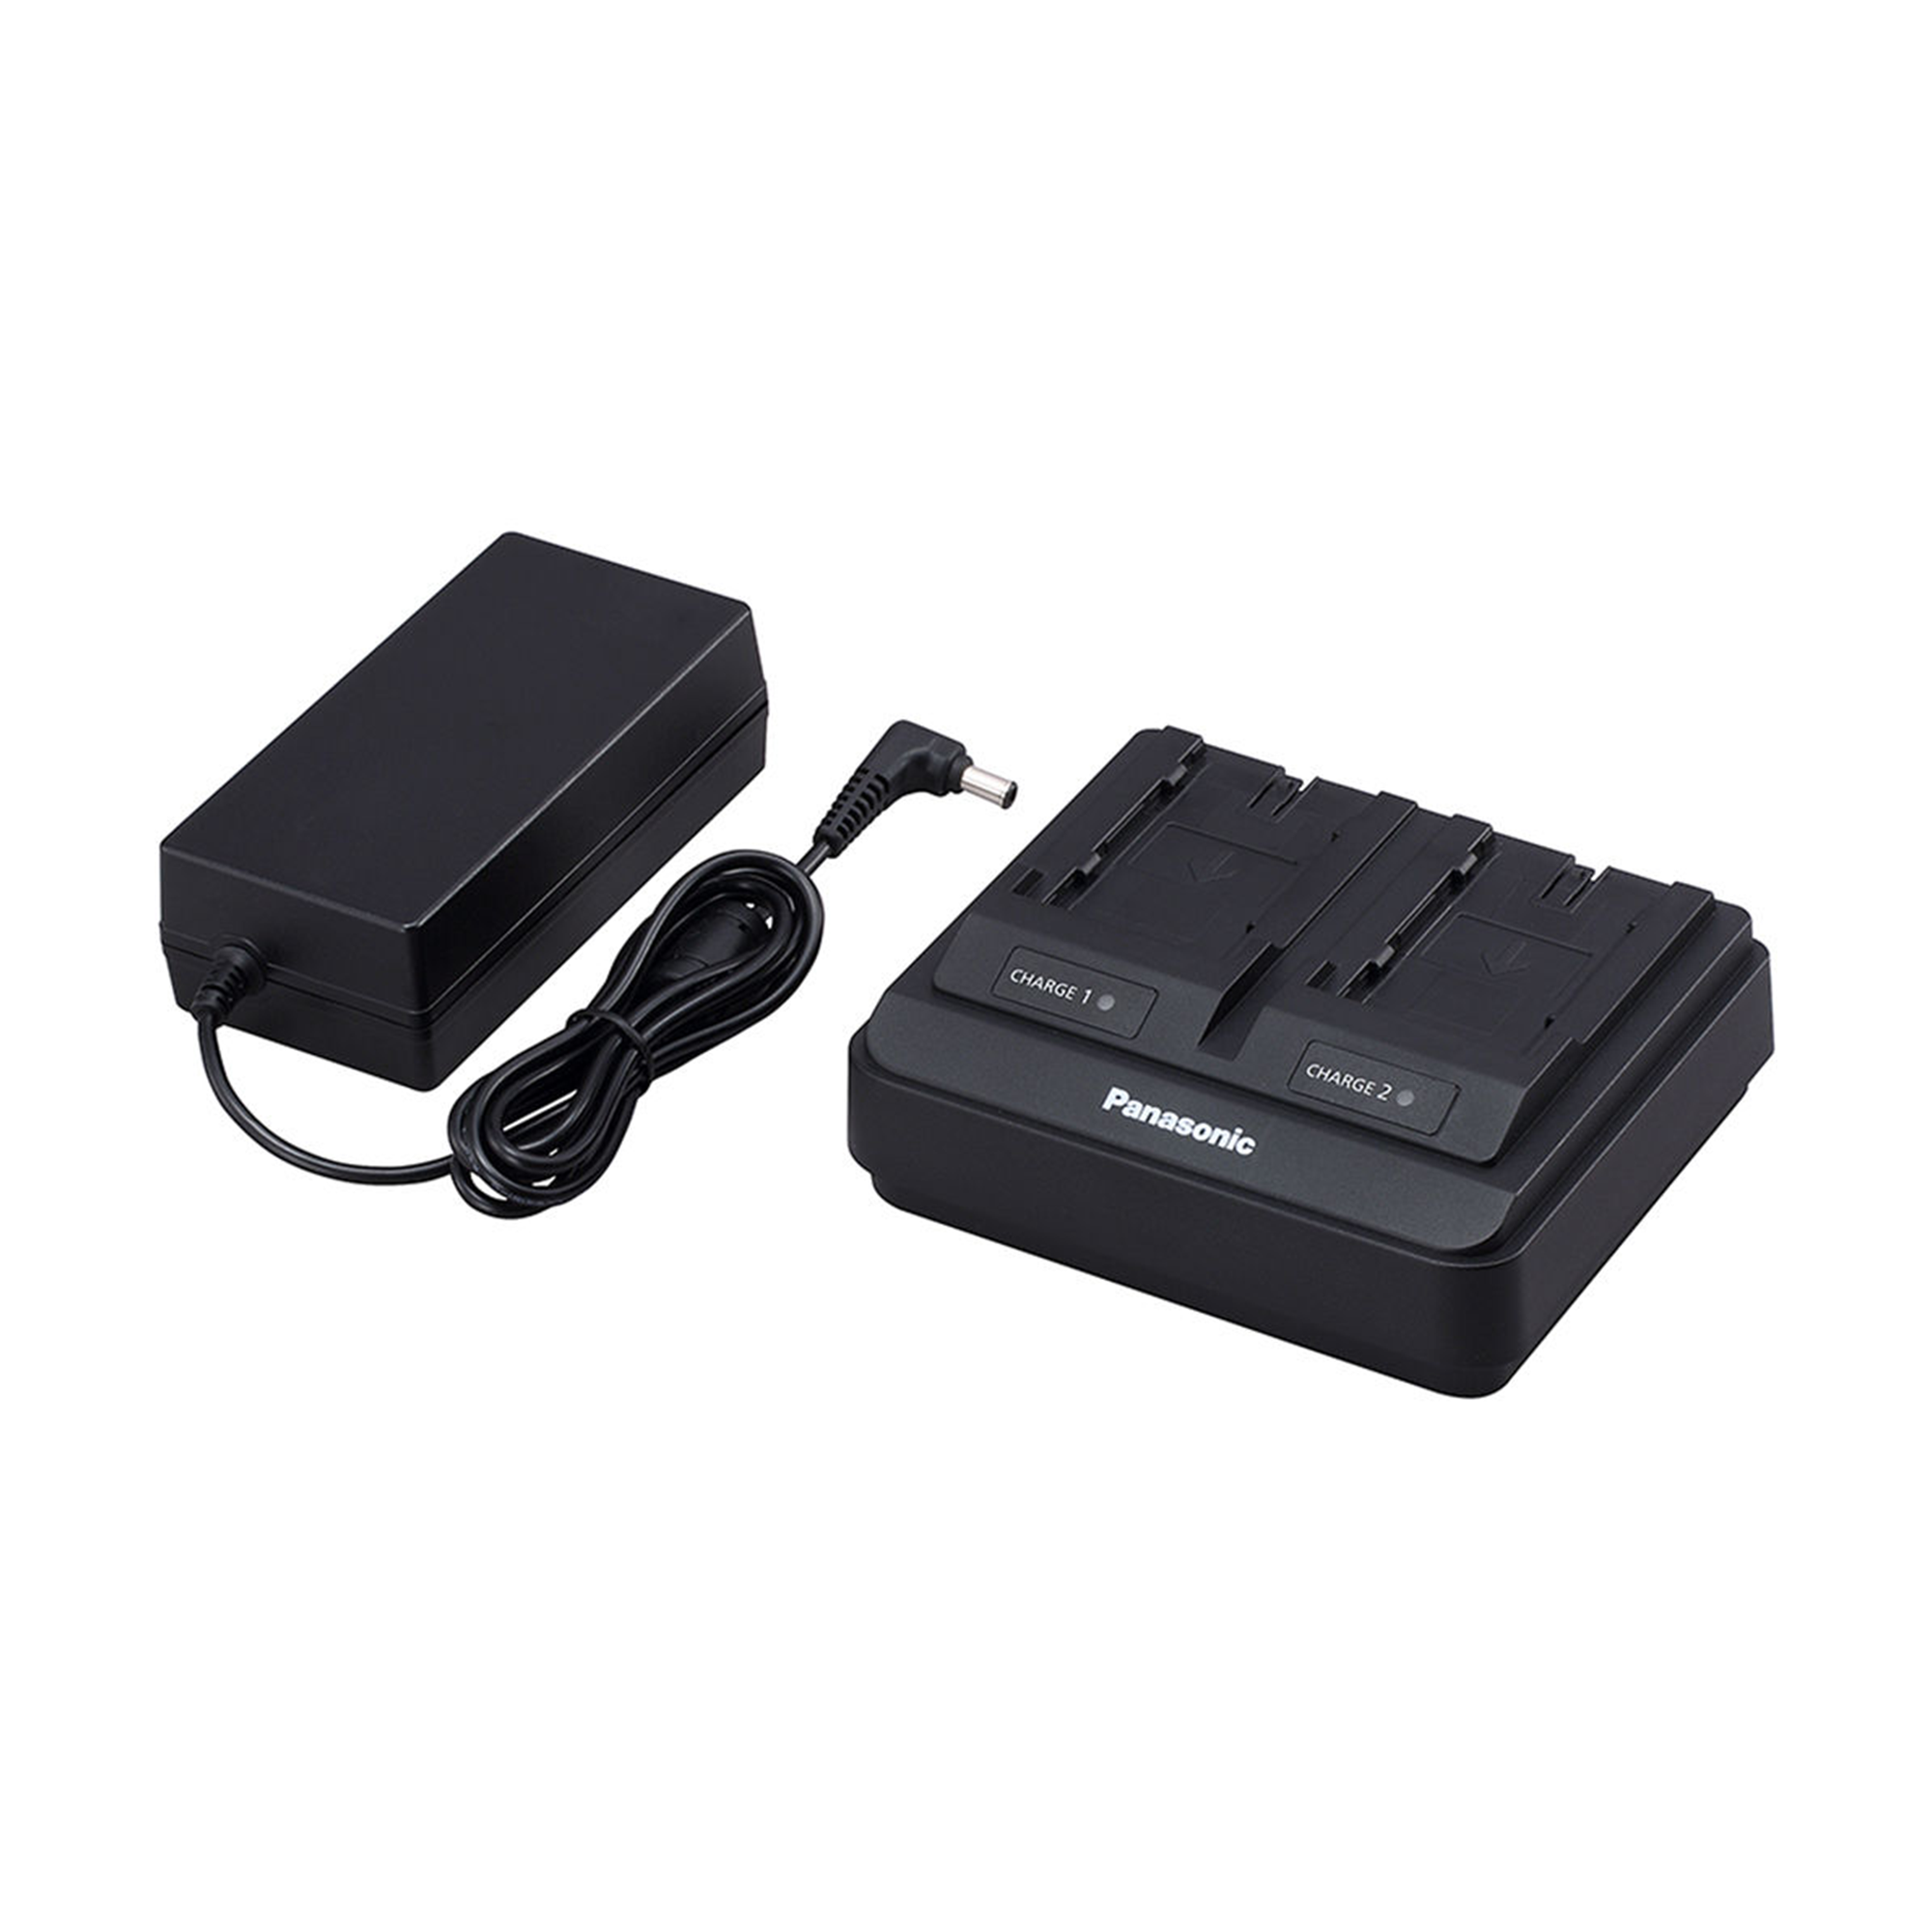 Panasonic Dual Charger for PX270,DVX200, AC30, UX